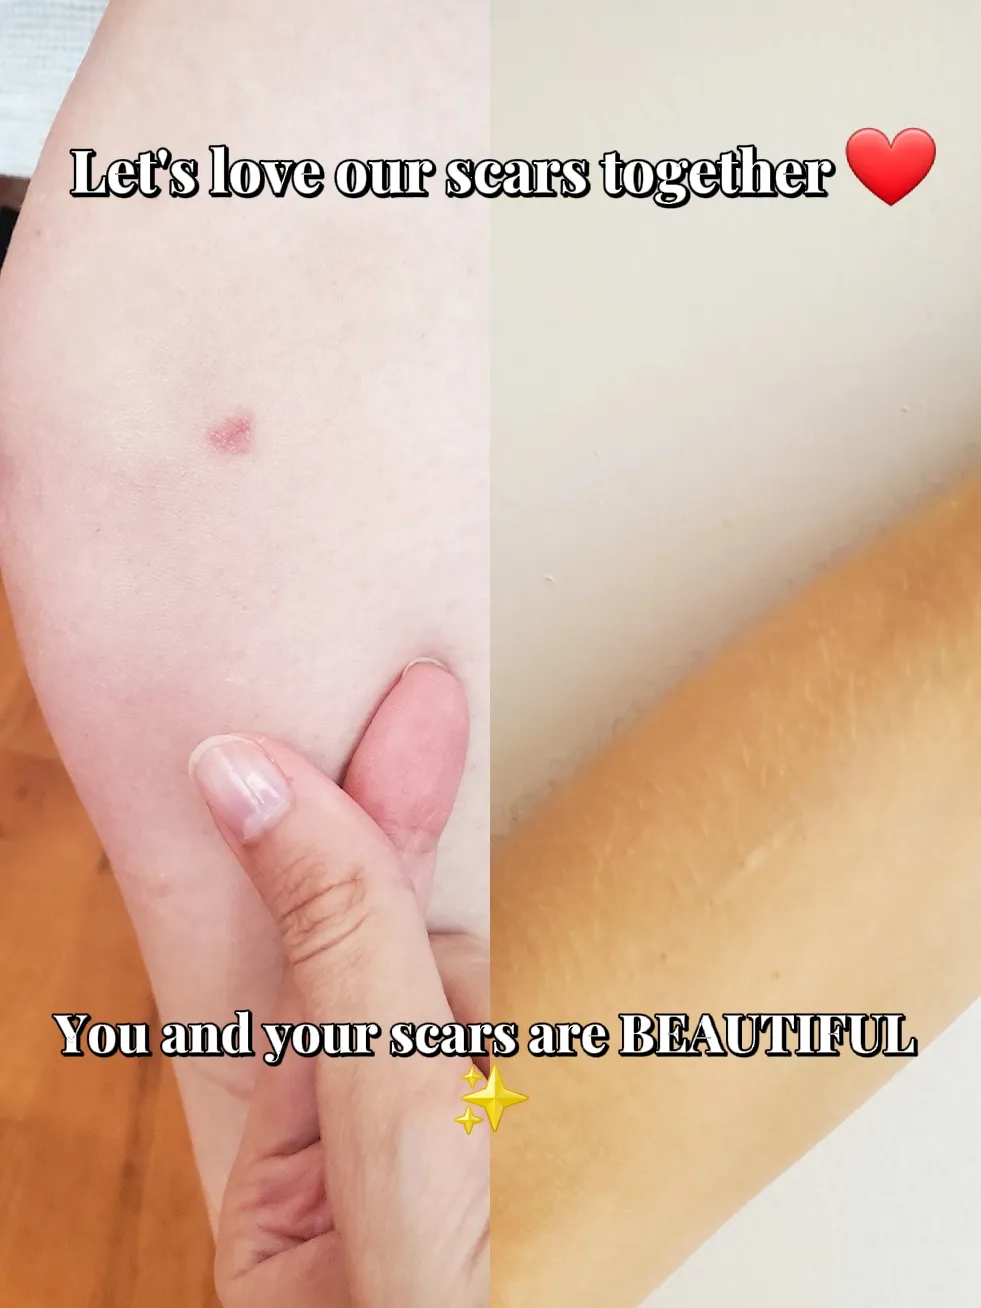 Trigger Warning] There are about 130 scars on my thighs. Would